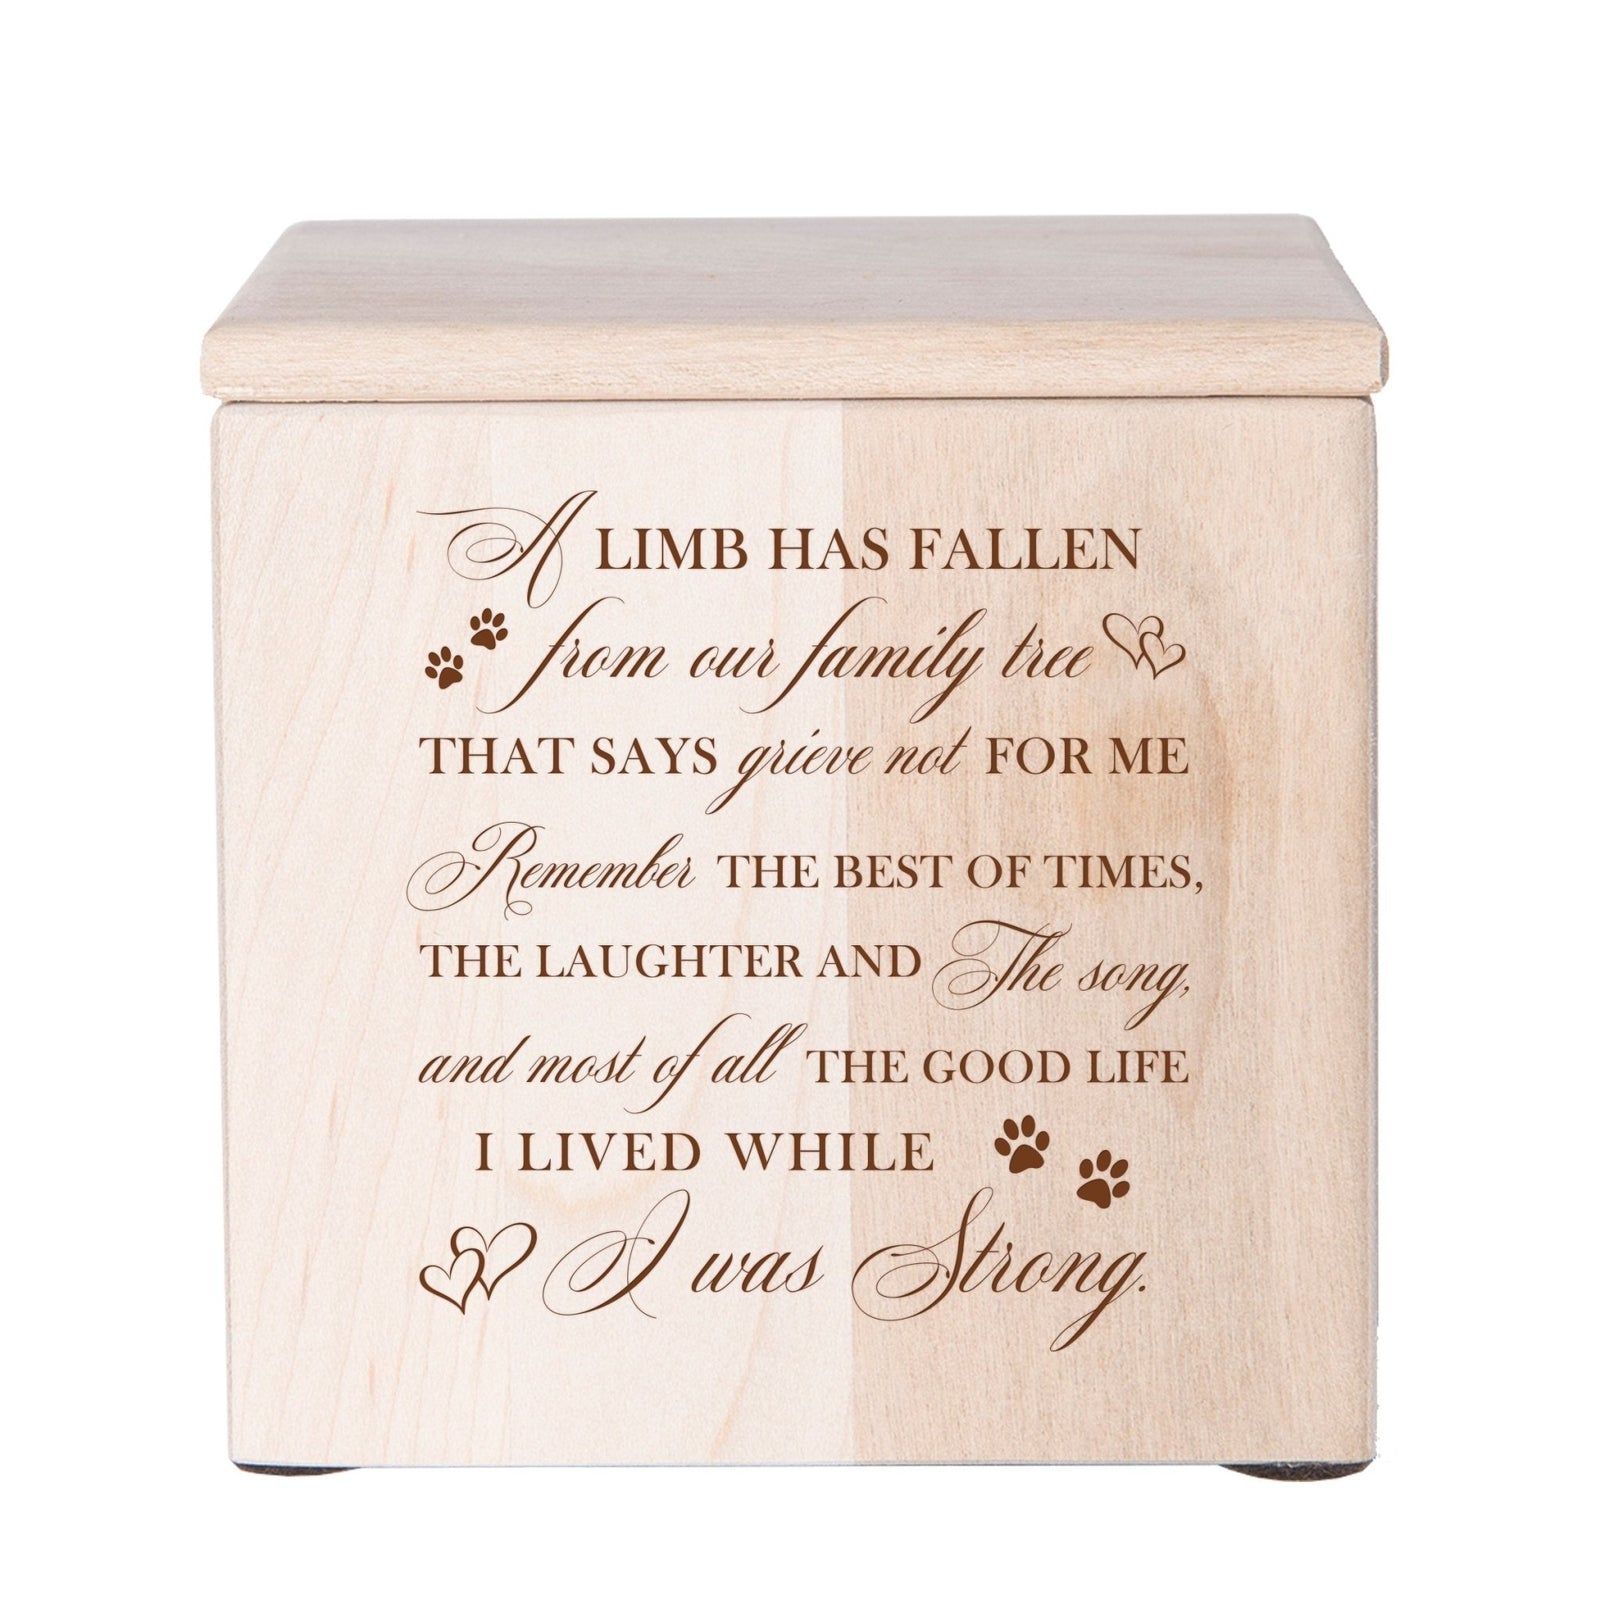 Pet Memorial Keepsake Cremation Urn Box for Dog or Cat - A Limb Has Fallen From Our Family Tree - LifeSong Milestones